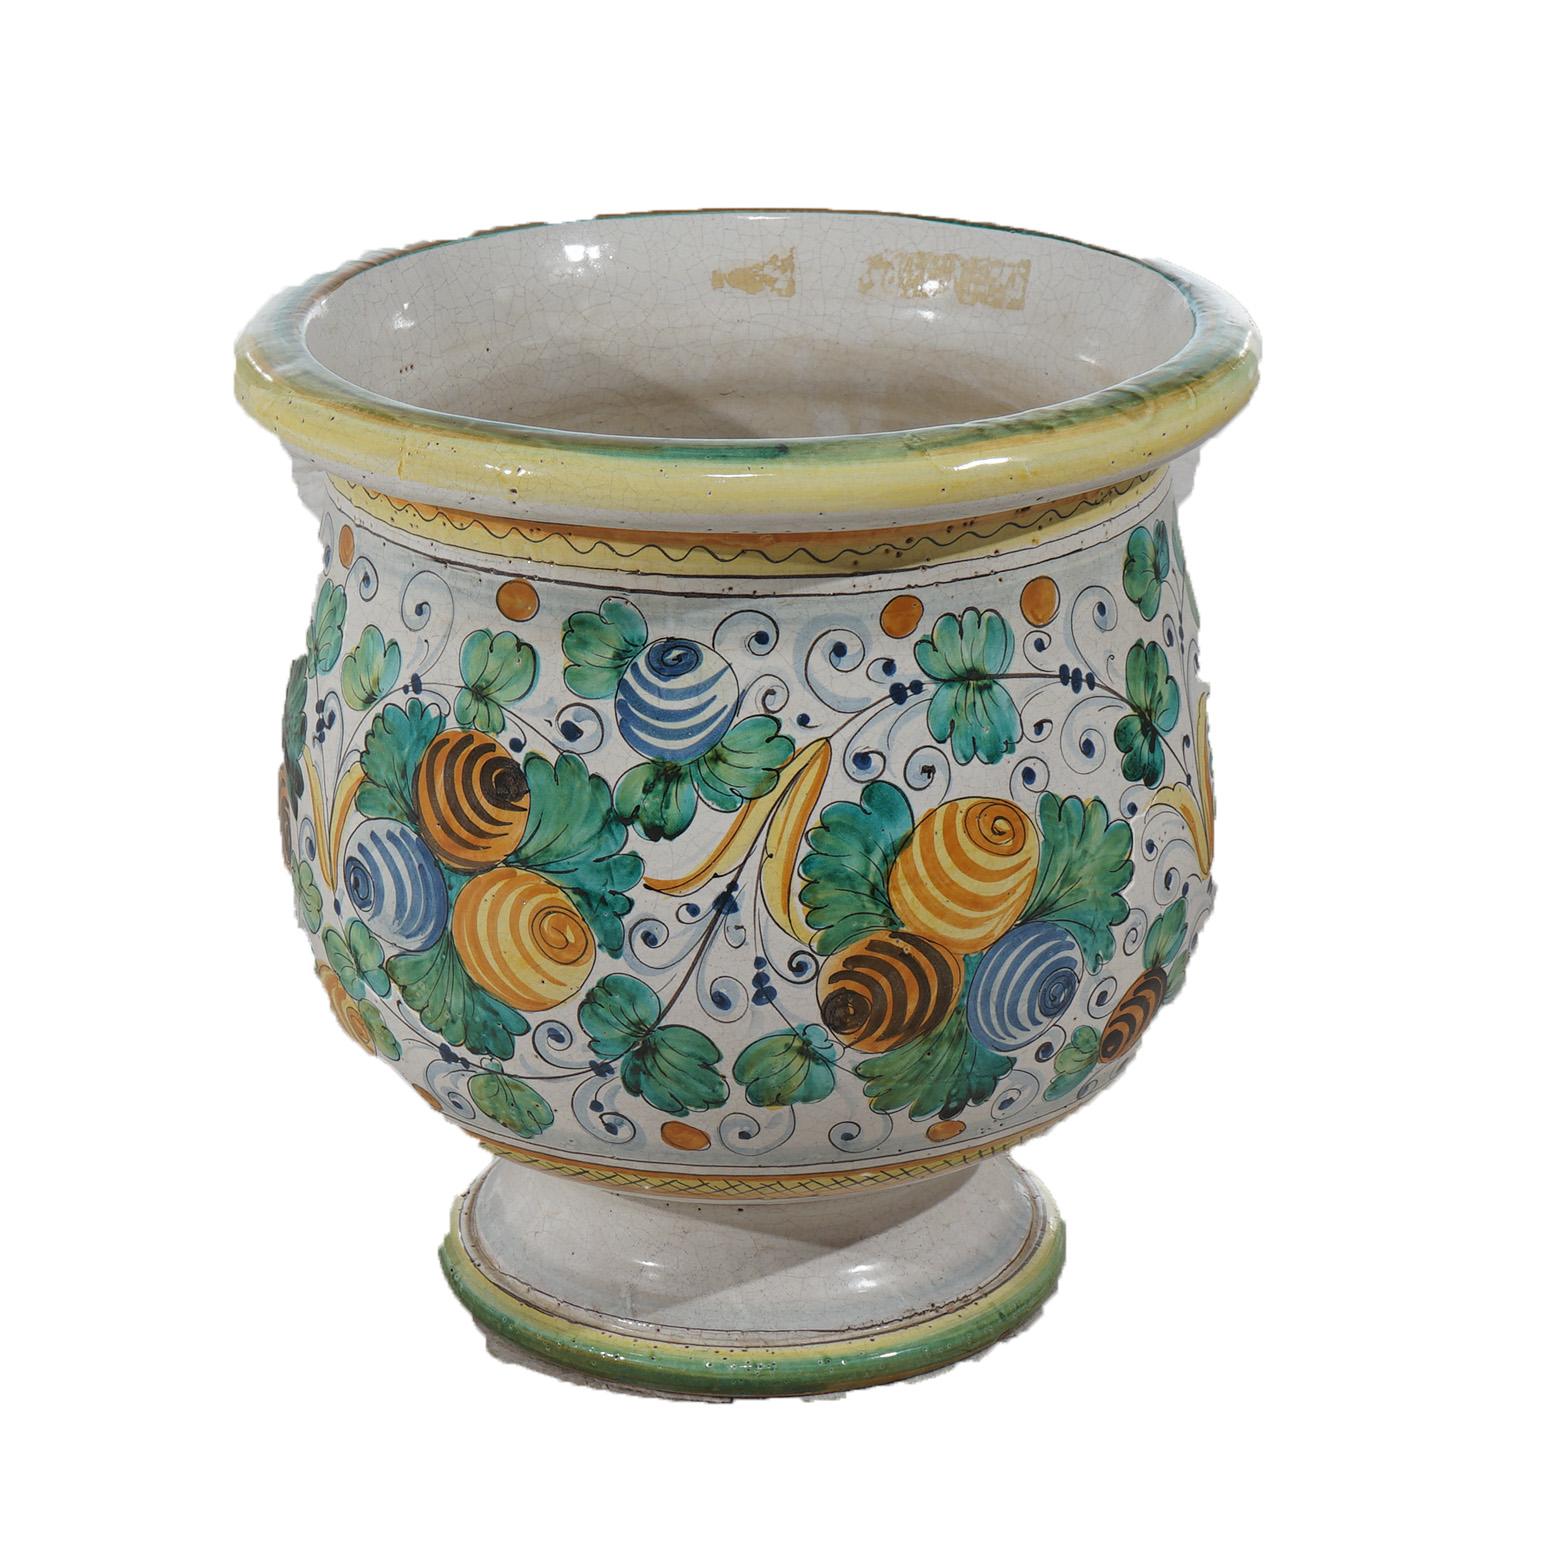 An Italian floor vase offers Majolica terracotta pottery construction with hand painted fruit and foliate elements throughout, 20th century

Measures- 17.5''H x 17''W x 17''D